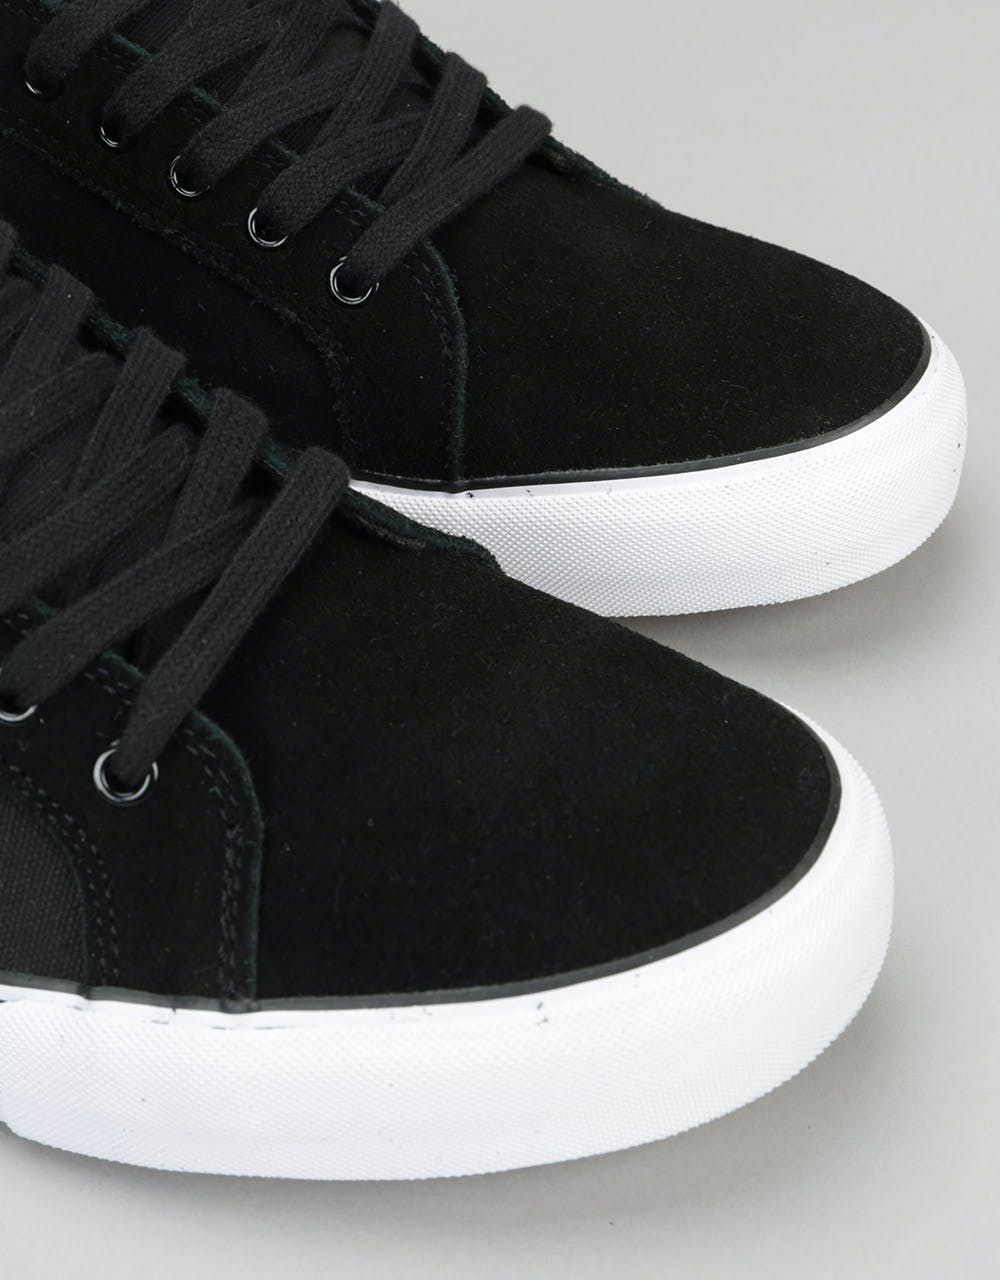 State Hudson Skate Shoes - Black/White/Red Suede/Canvas